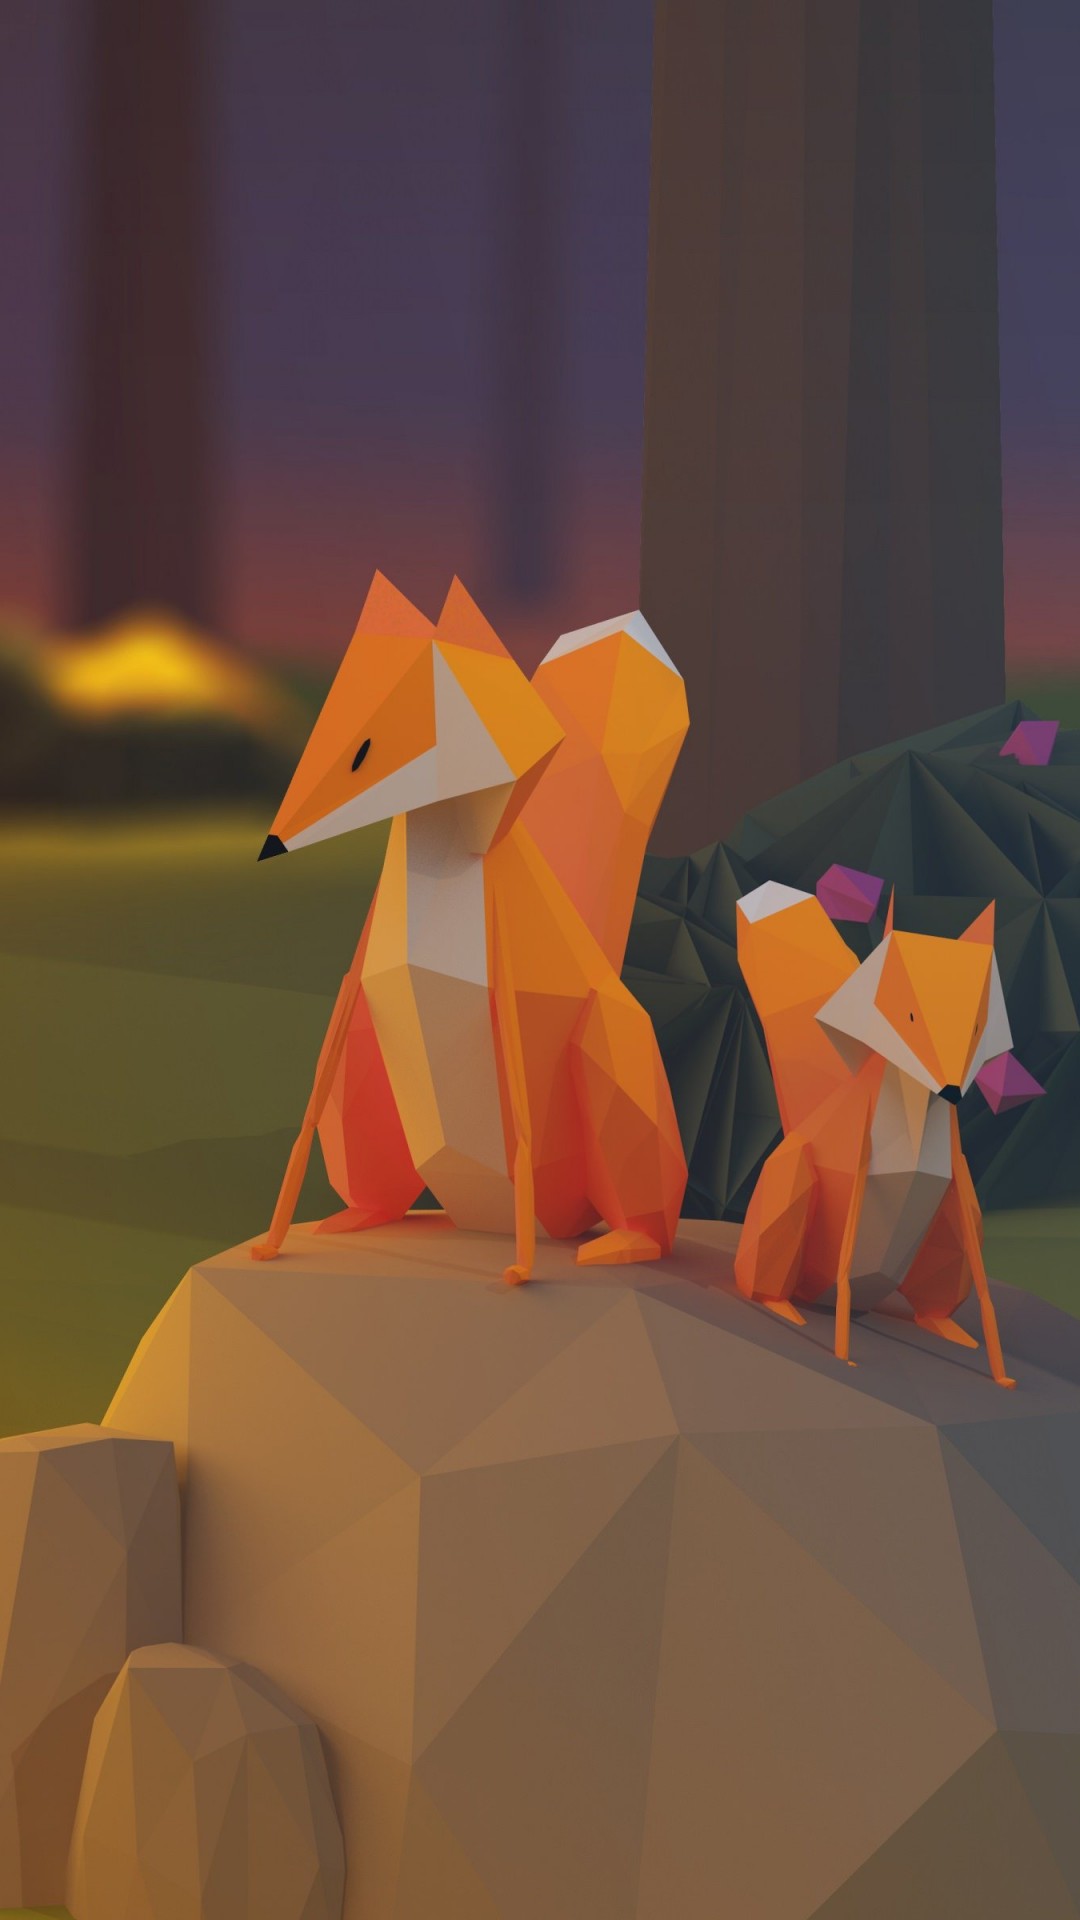 Low Poly Foxes Wallpaper for HTC One